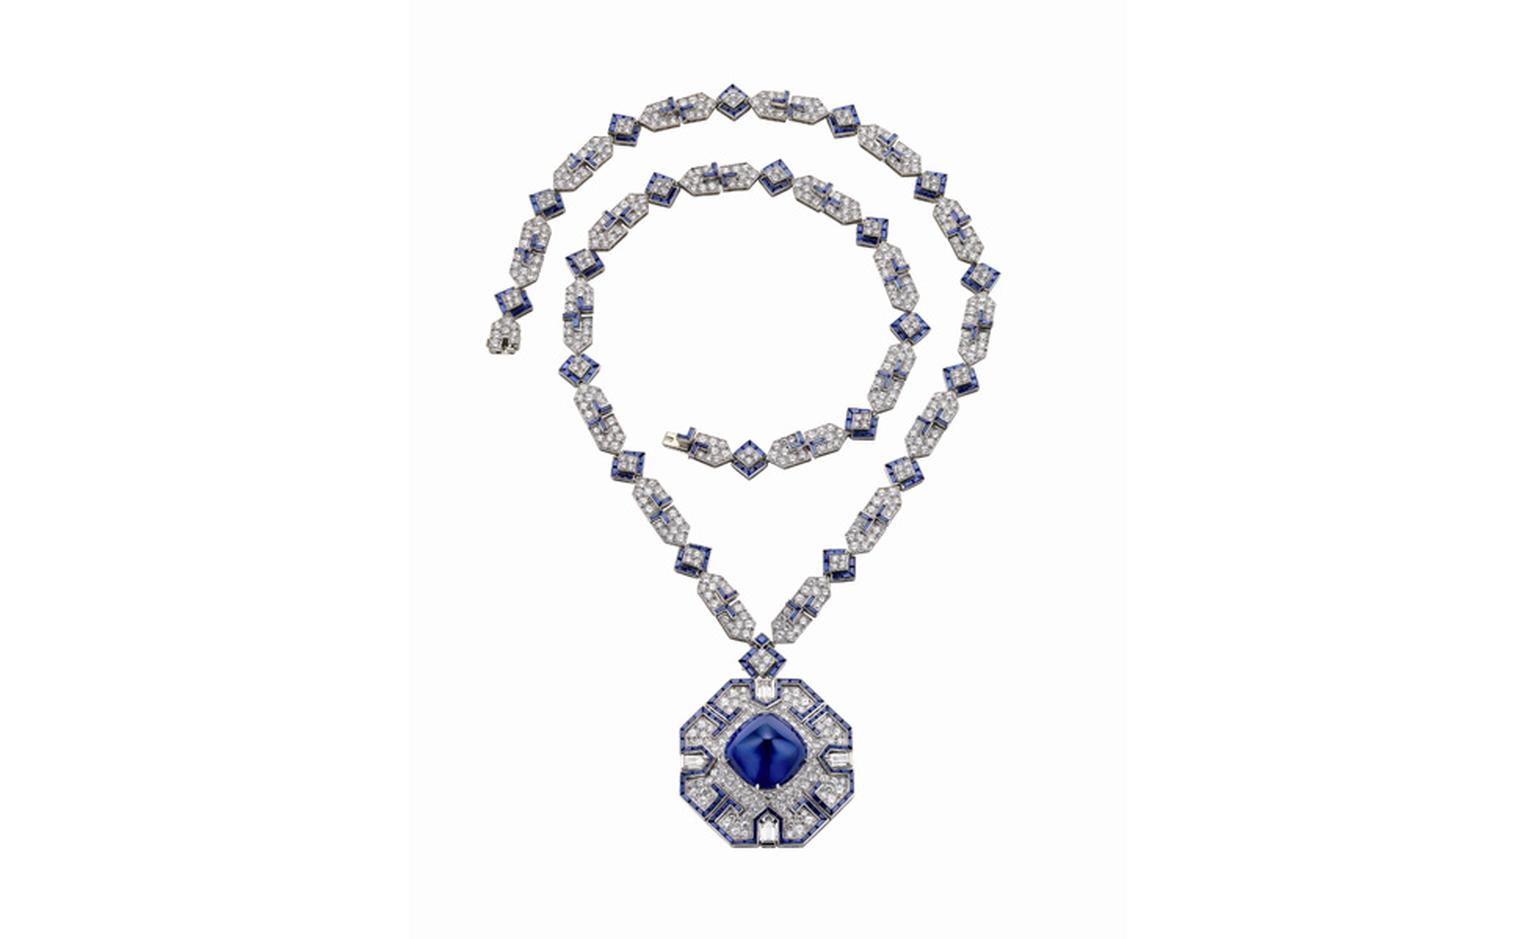 Bulgari sapphire and diamond necklace that belonged to Elizabeth Taylor. The sautoir is in platinum with sapphire and diamonds. The sugar-loaf cabochon sapphire of approximately 65 carats. The sautoir was given to Elizabeth Taylor by Richard Bur...